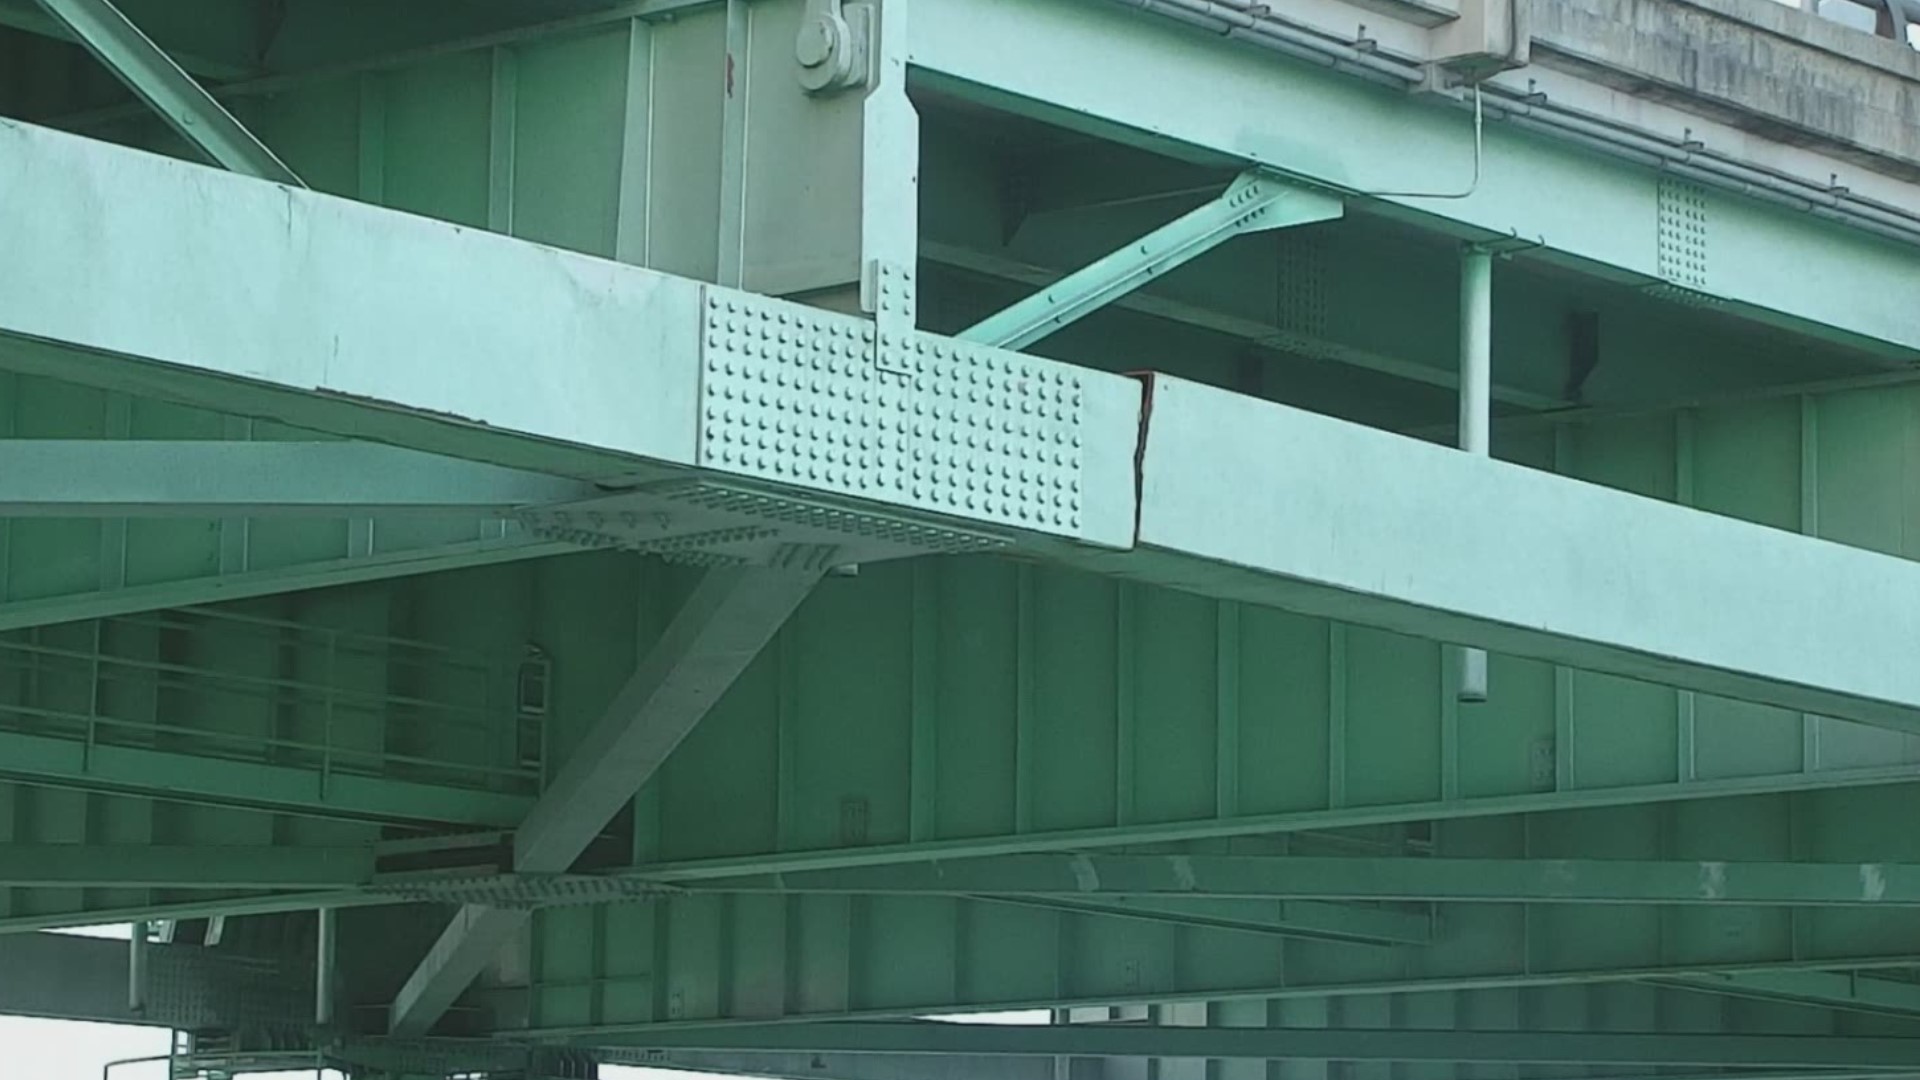 Officials confirm an employee failed at reporting the crack during the 2019 inspection of the I-40 Mississippi River bridge.